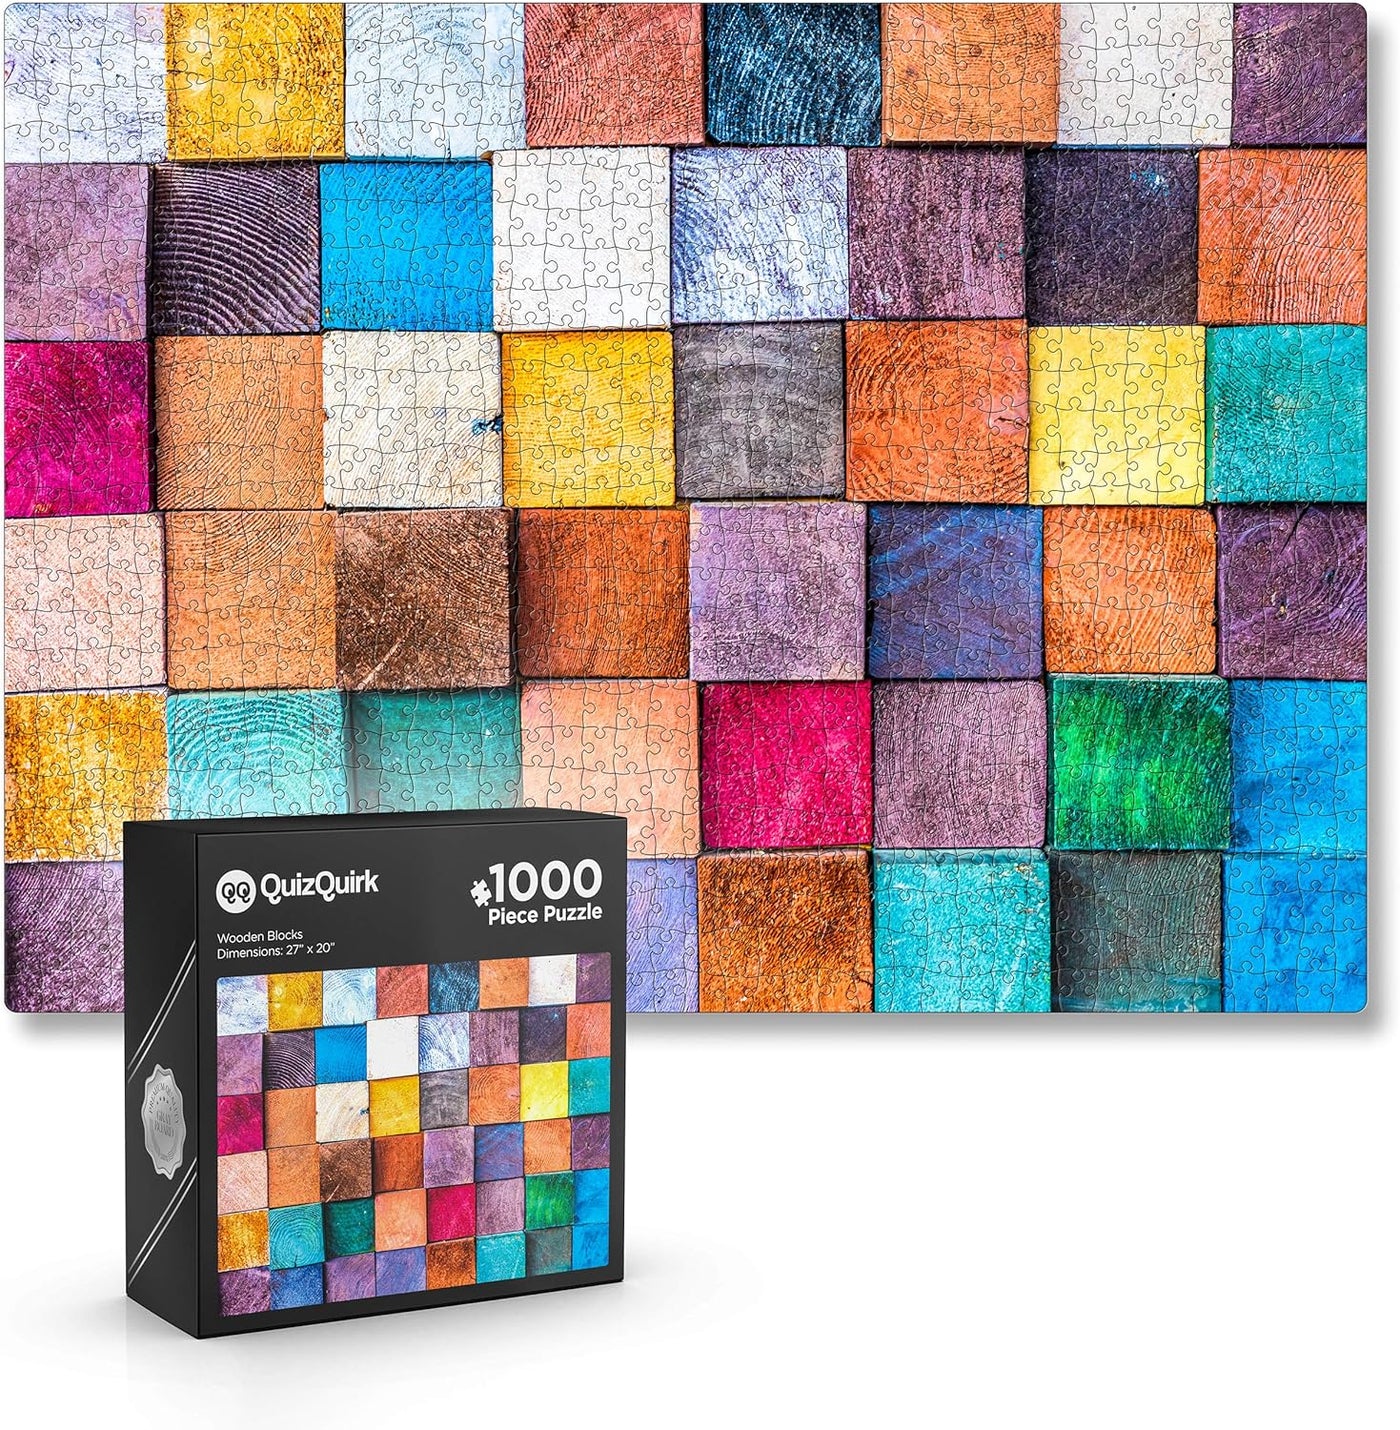 QuizQuirk 1000 Piece Puzzle, Colorful Wooden Blocks Jigsaw Puzzle for Adults/Teens (Puzzle Saver Kit Included)